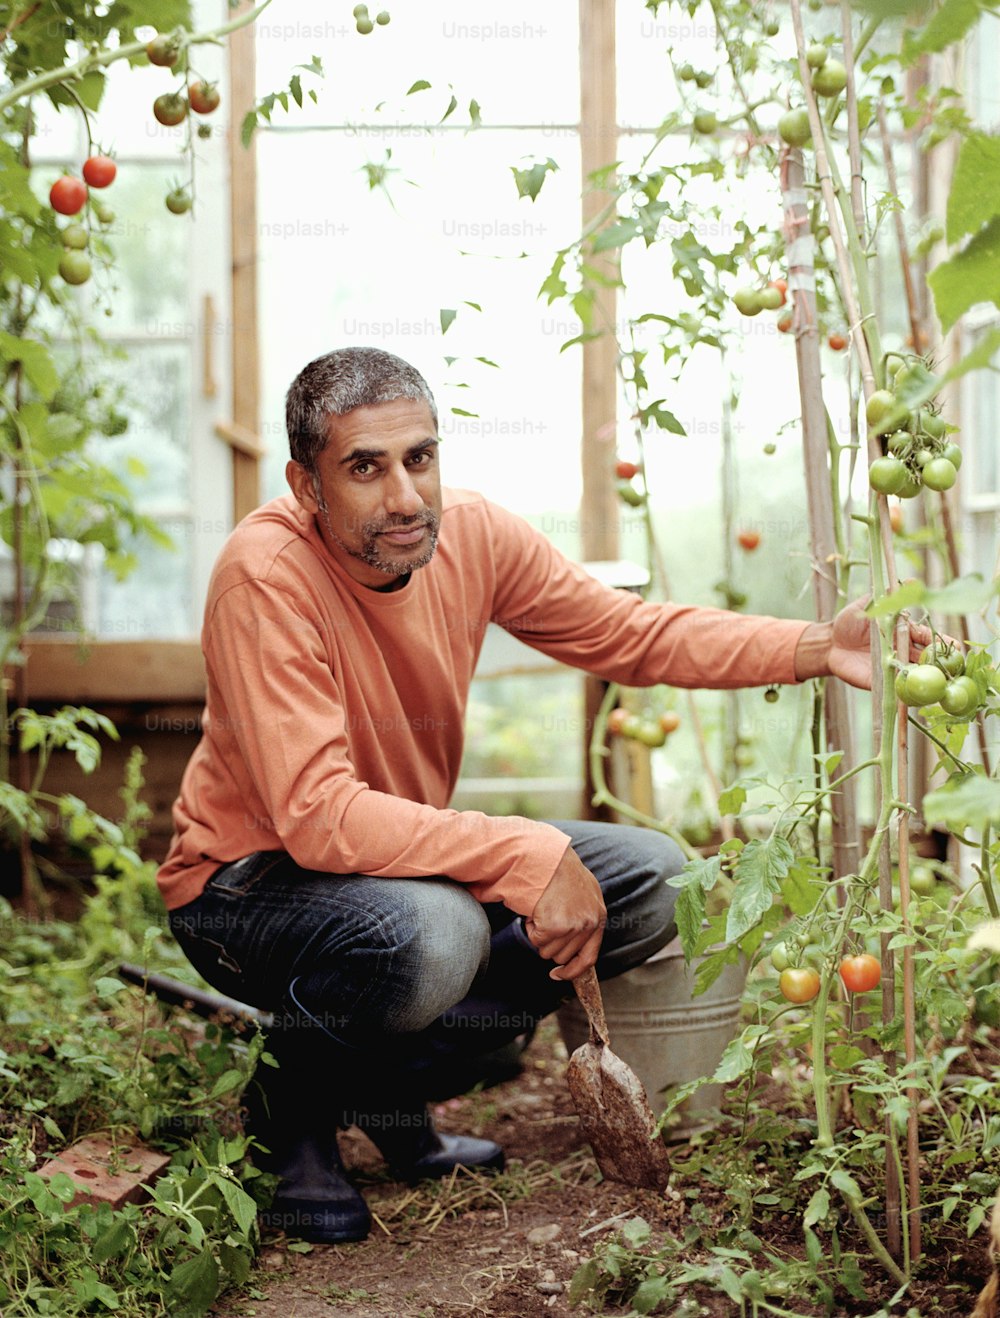 a man kneeling down next to a bush filled with tomatoes